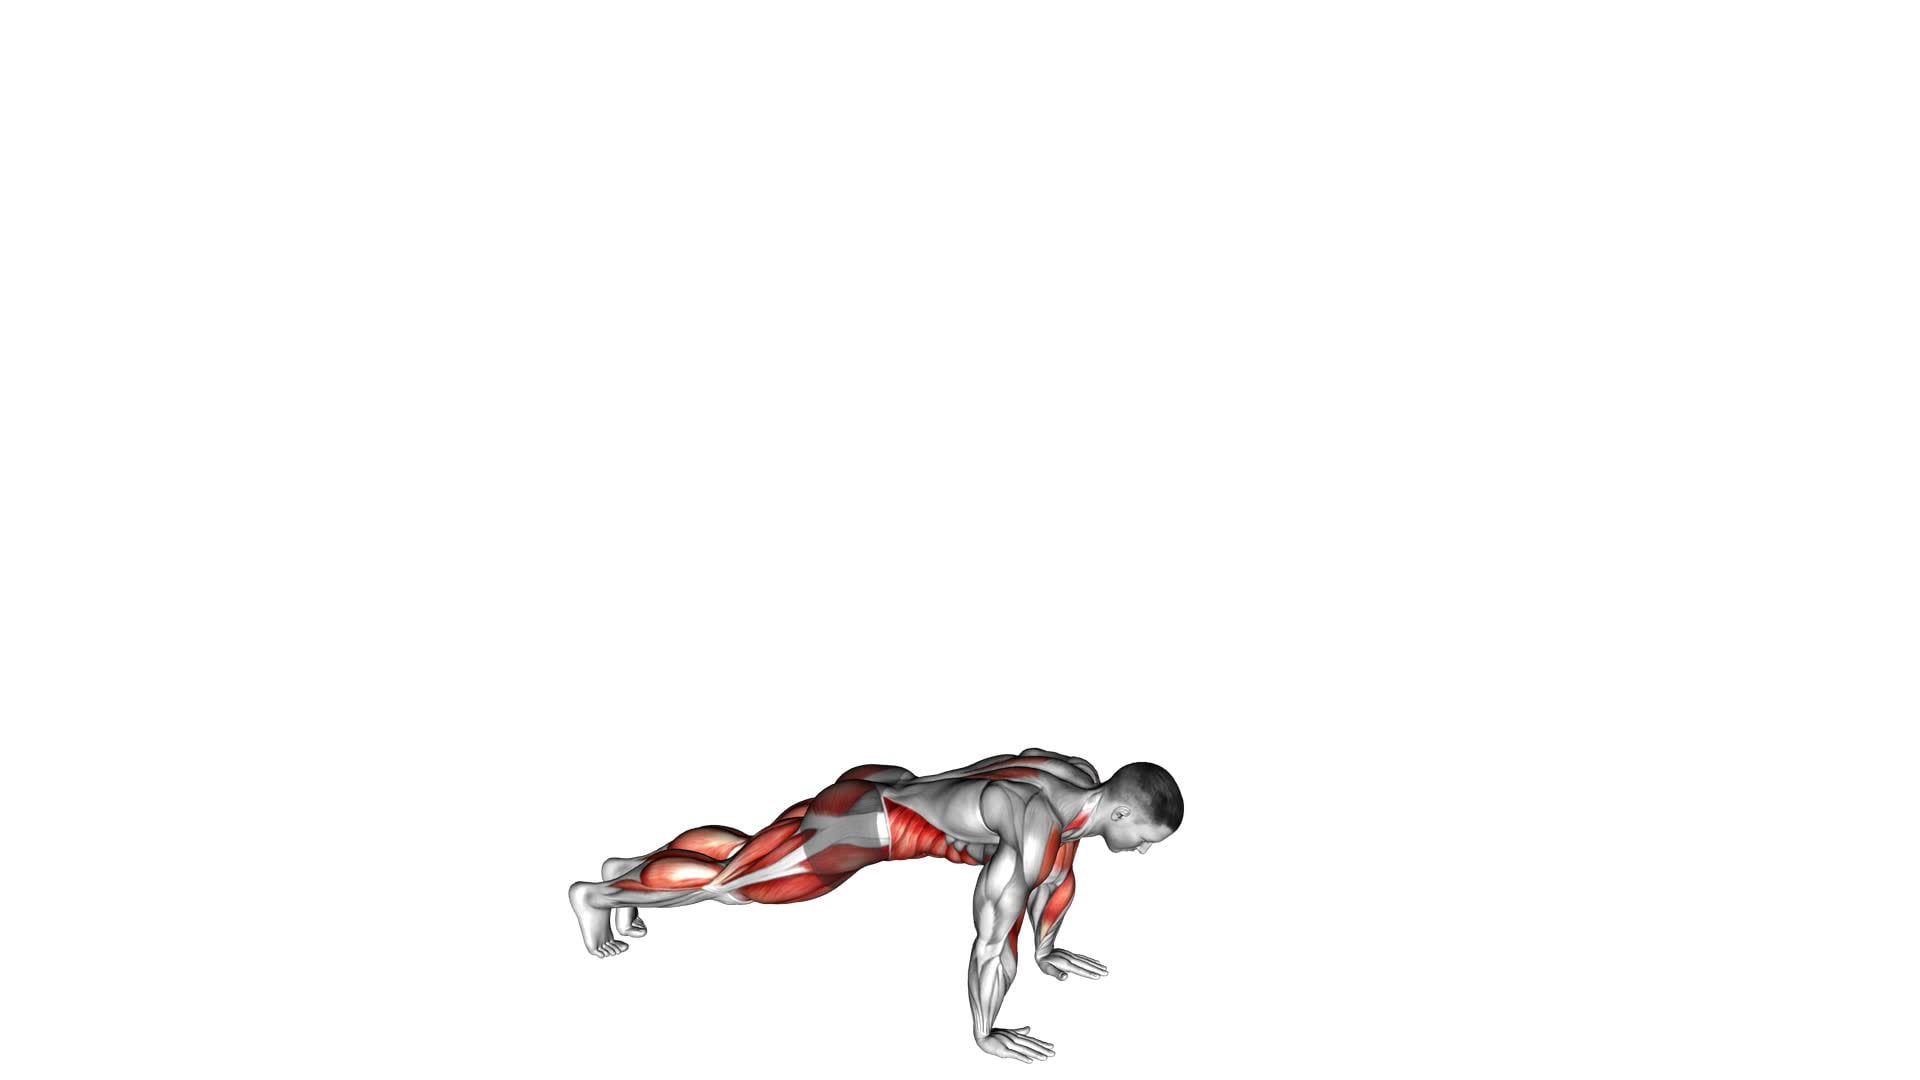 Burpee - Video Exercise Guide & Tips